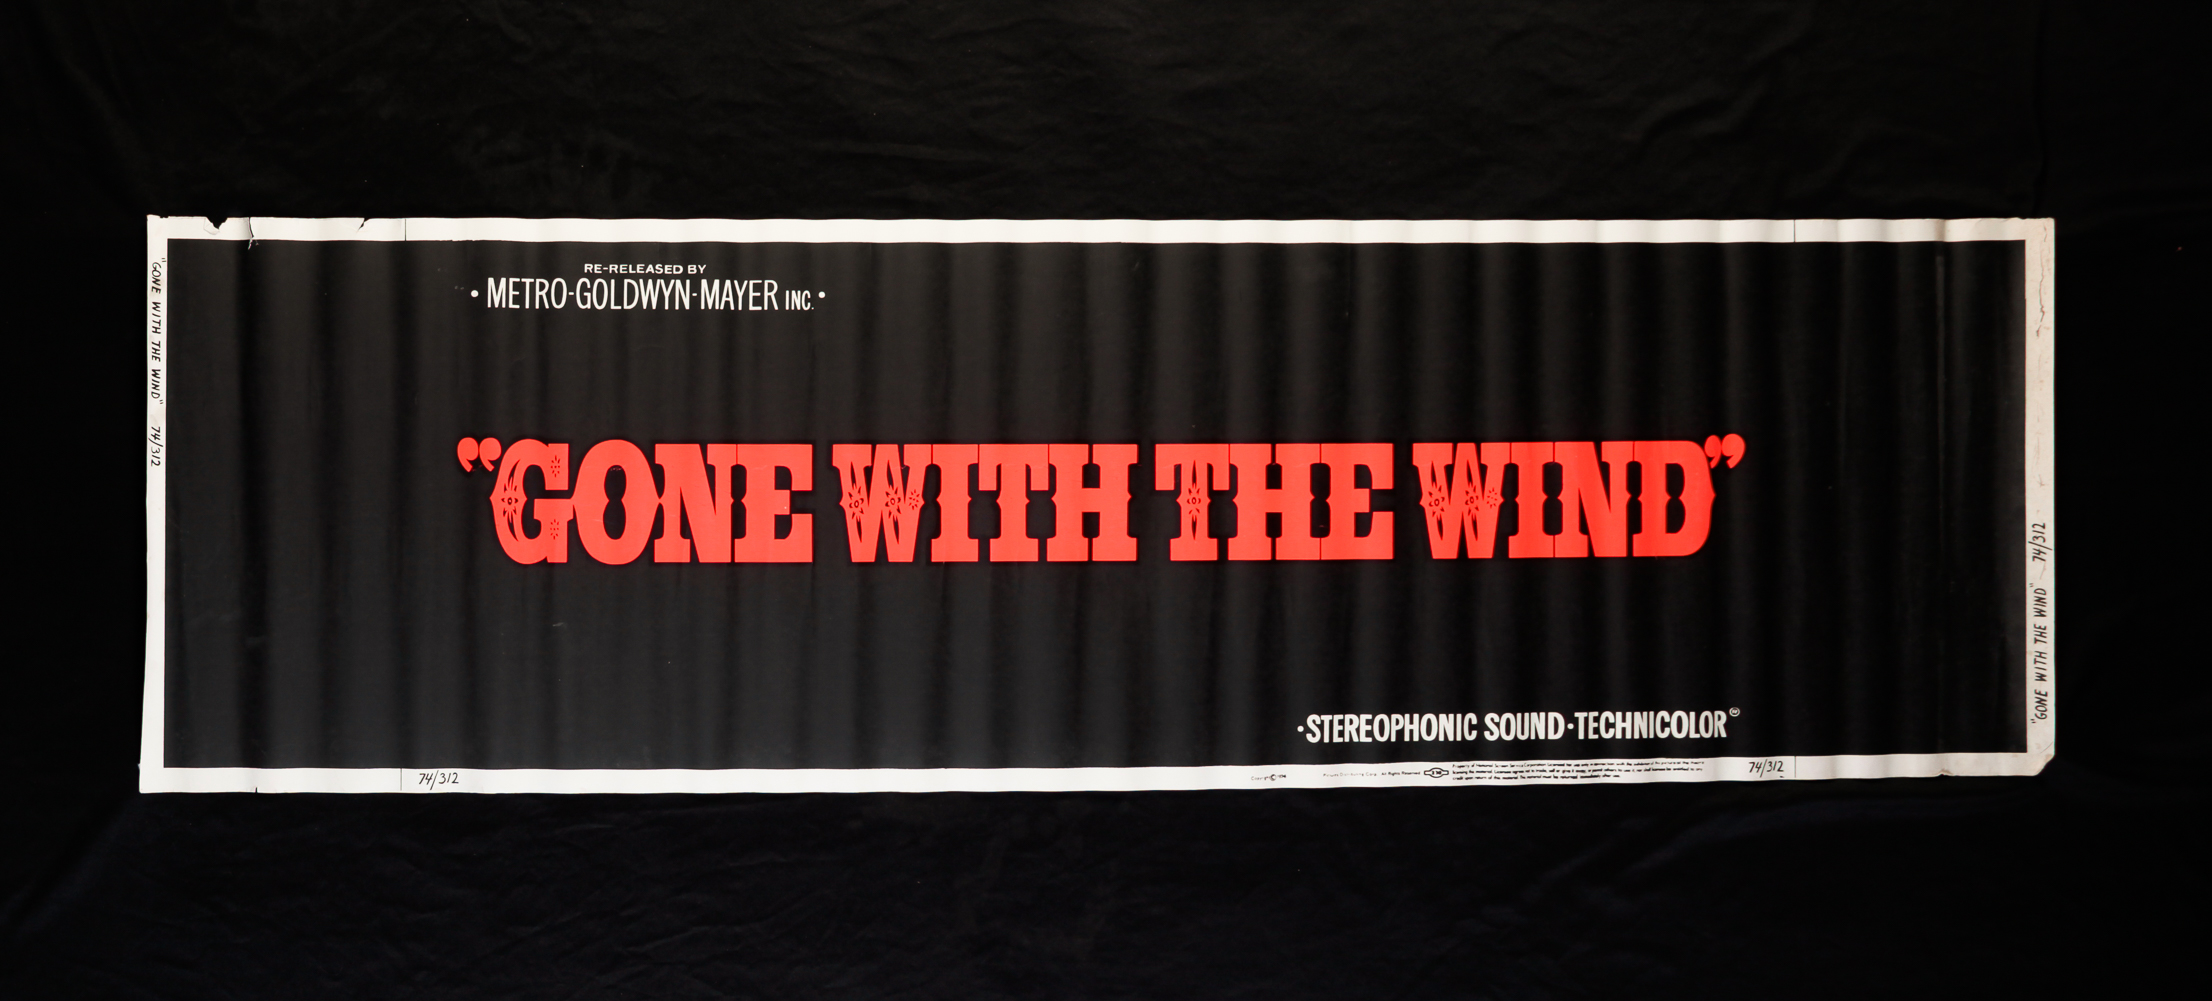 GONE WITH THE WIND MOVIE BANNER.